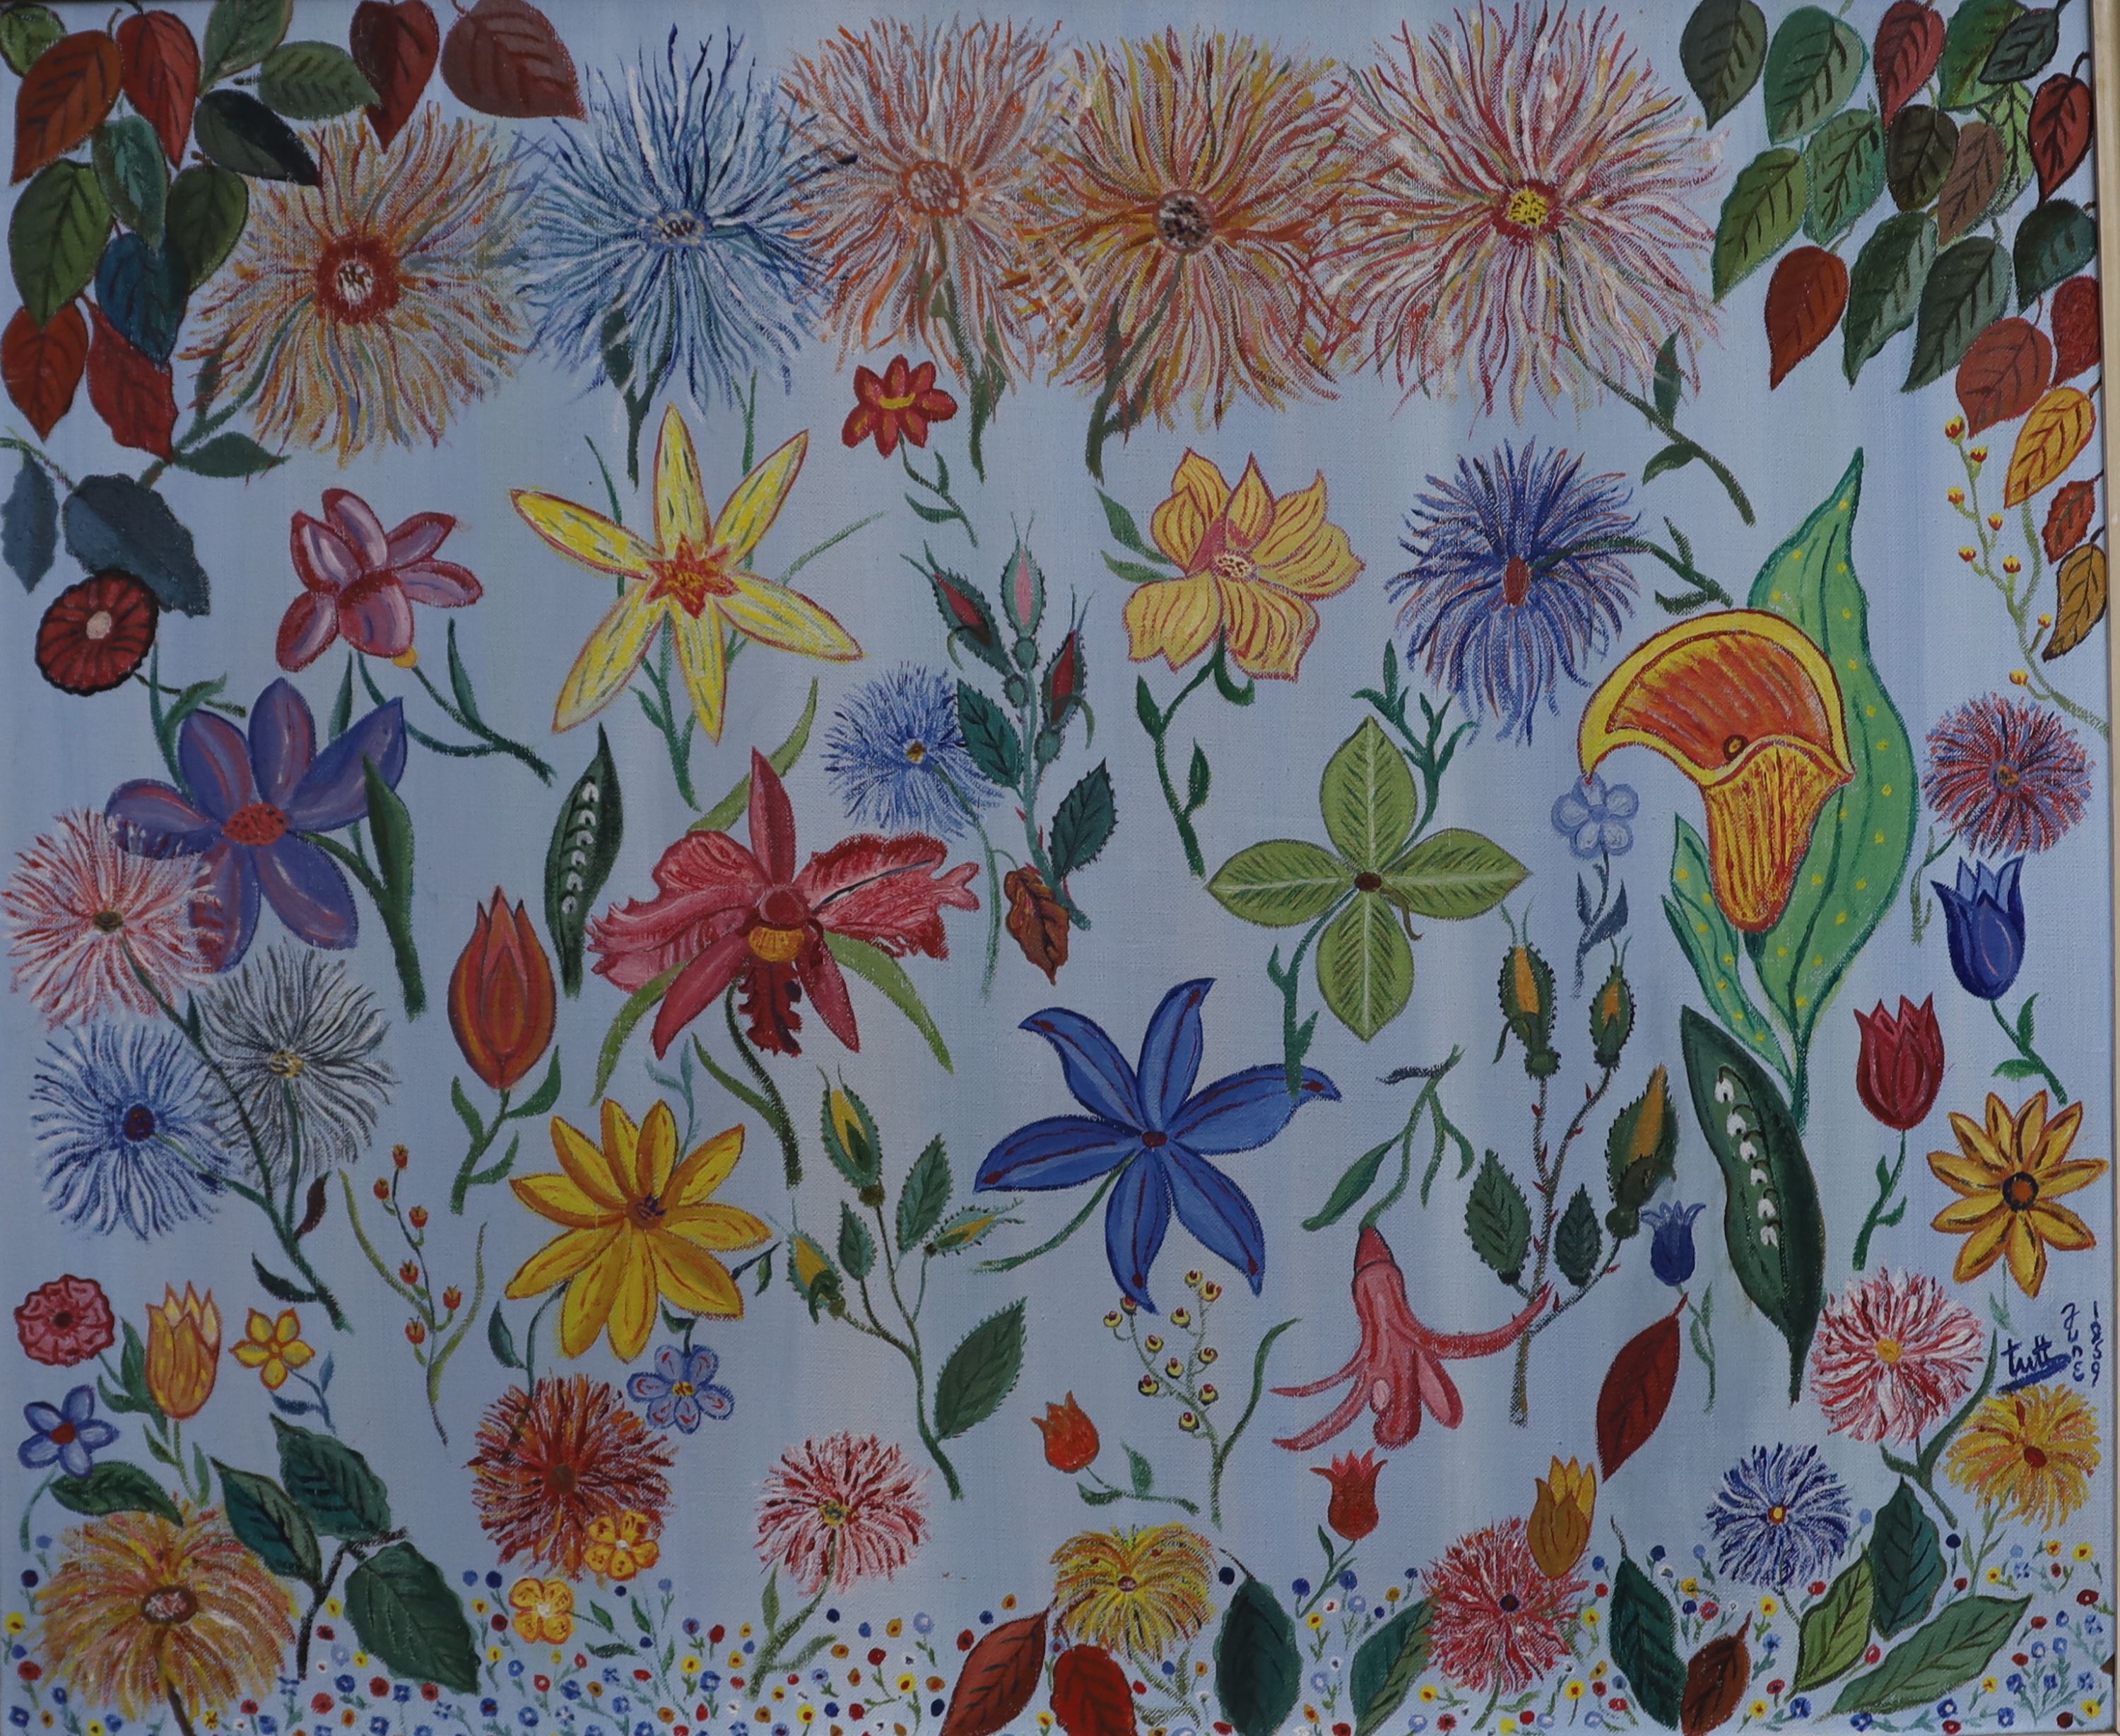 Tutt Flowers on a blue ground and Aquatic scene 50.5 x 61cm and 39.75 x 45.75cm